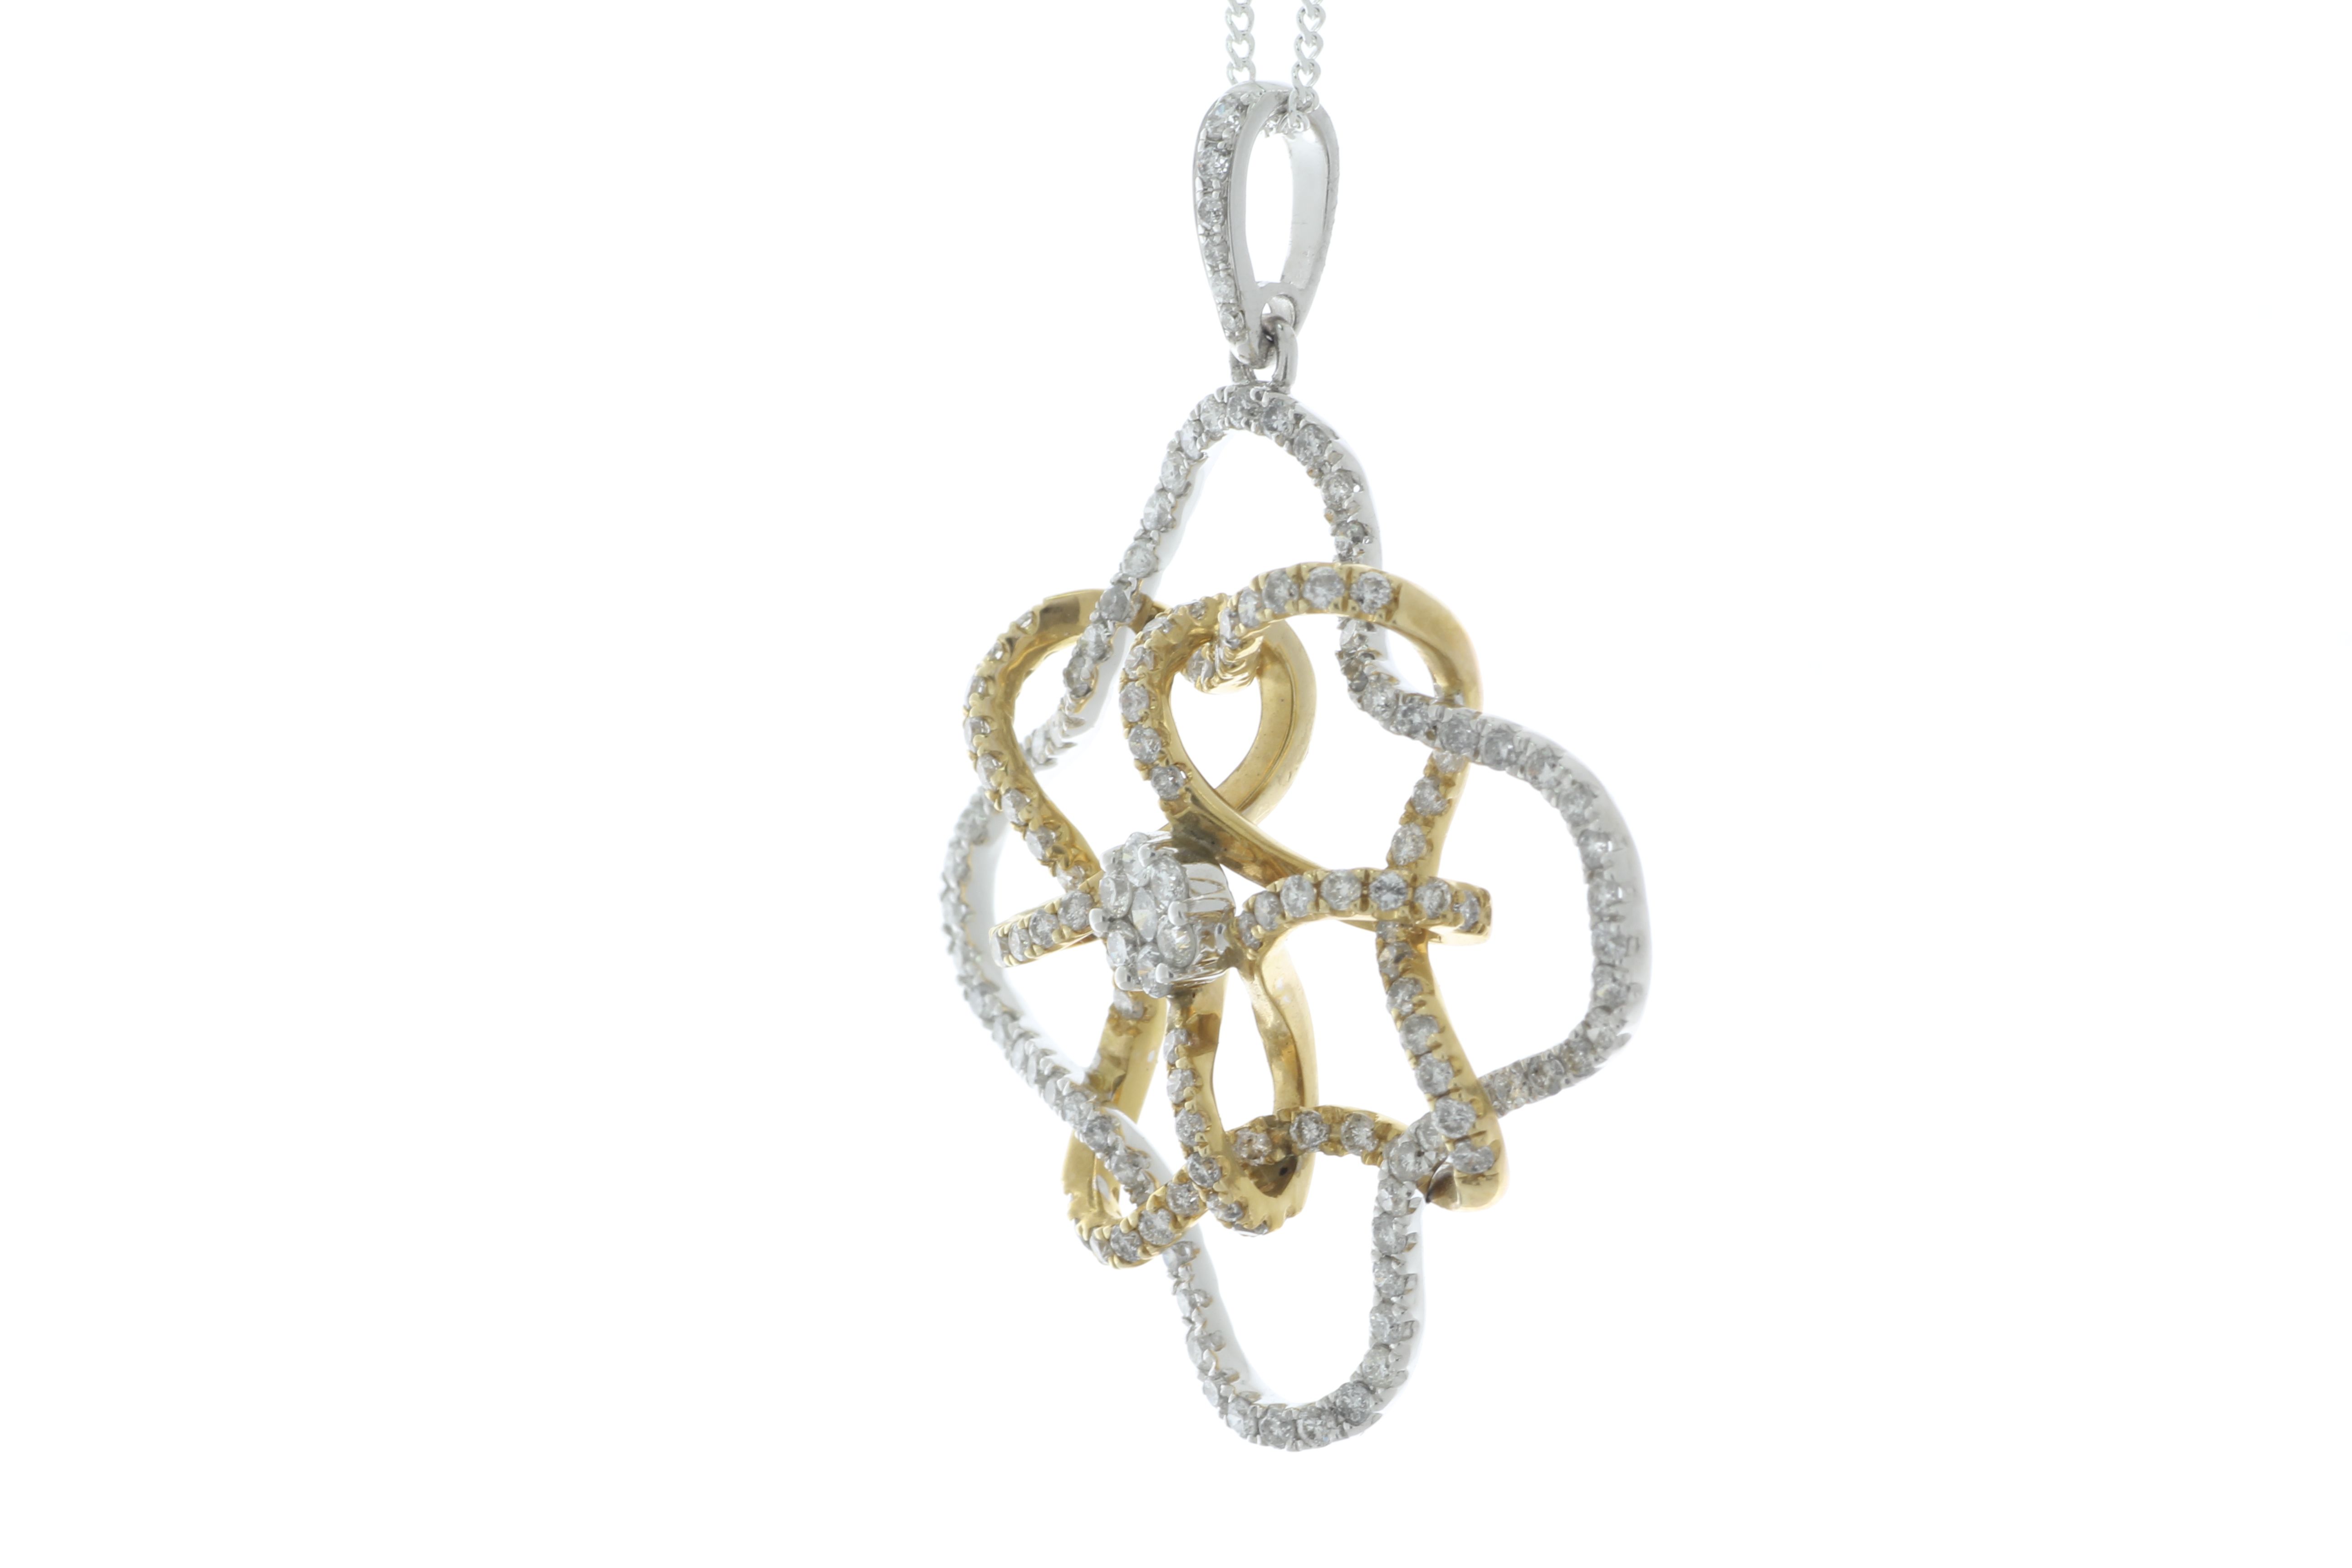 14ct Gold Illusion Set Cluster Diamond Pendant 1.77 Carats - Valued By IDI £7,575.00 - One hundred - Image 3 of 4